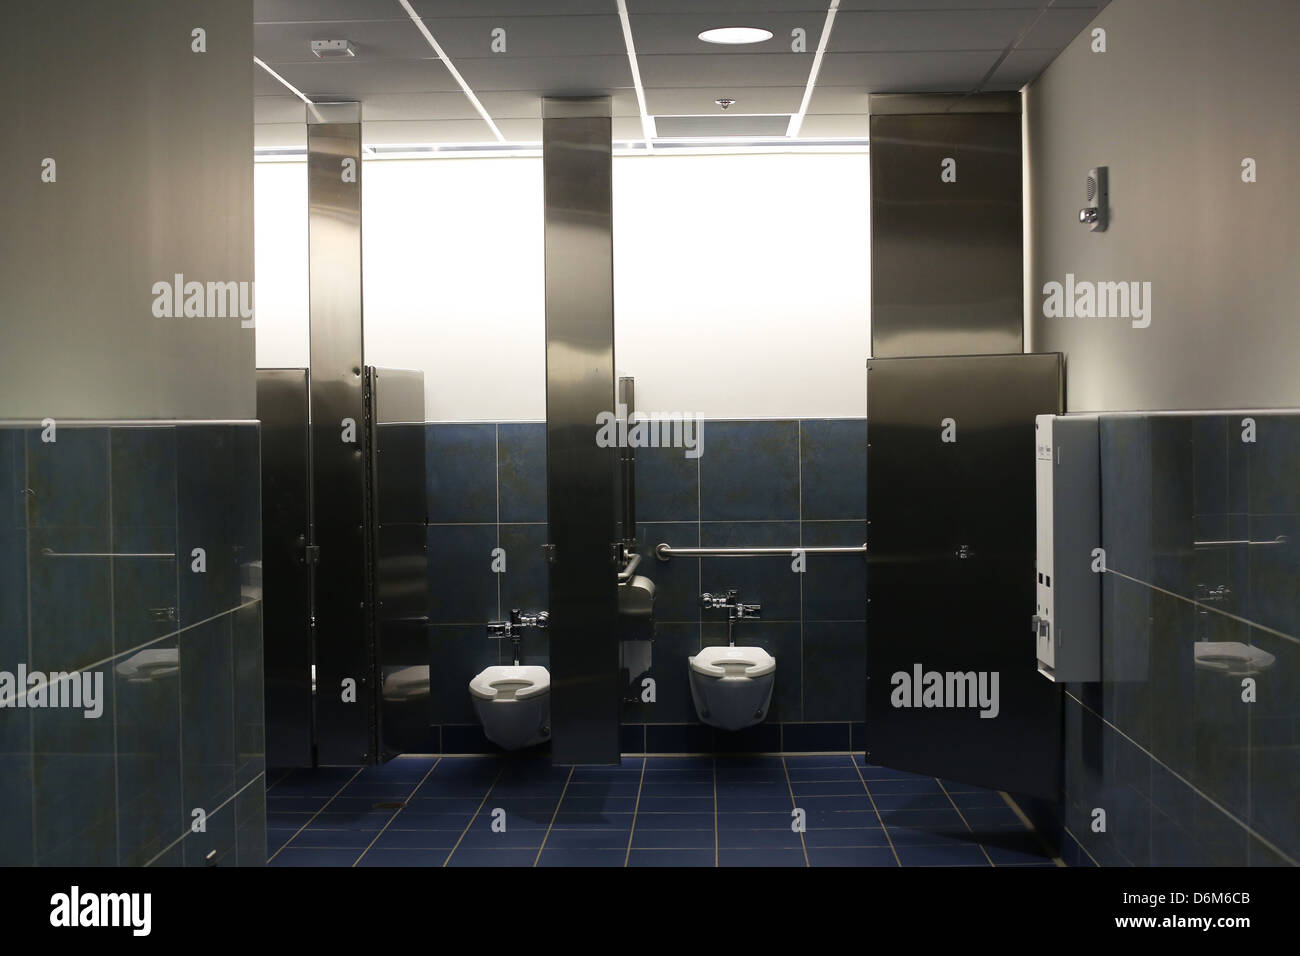 Two stalls of a very clean public restroom. Stock Photo